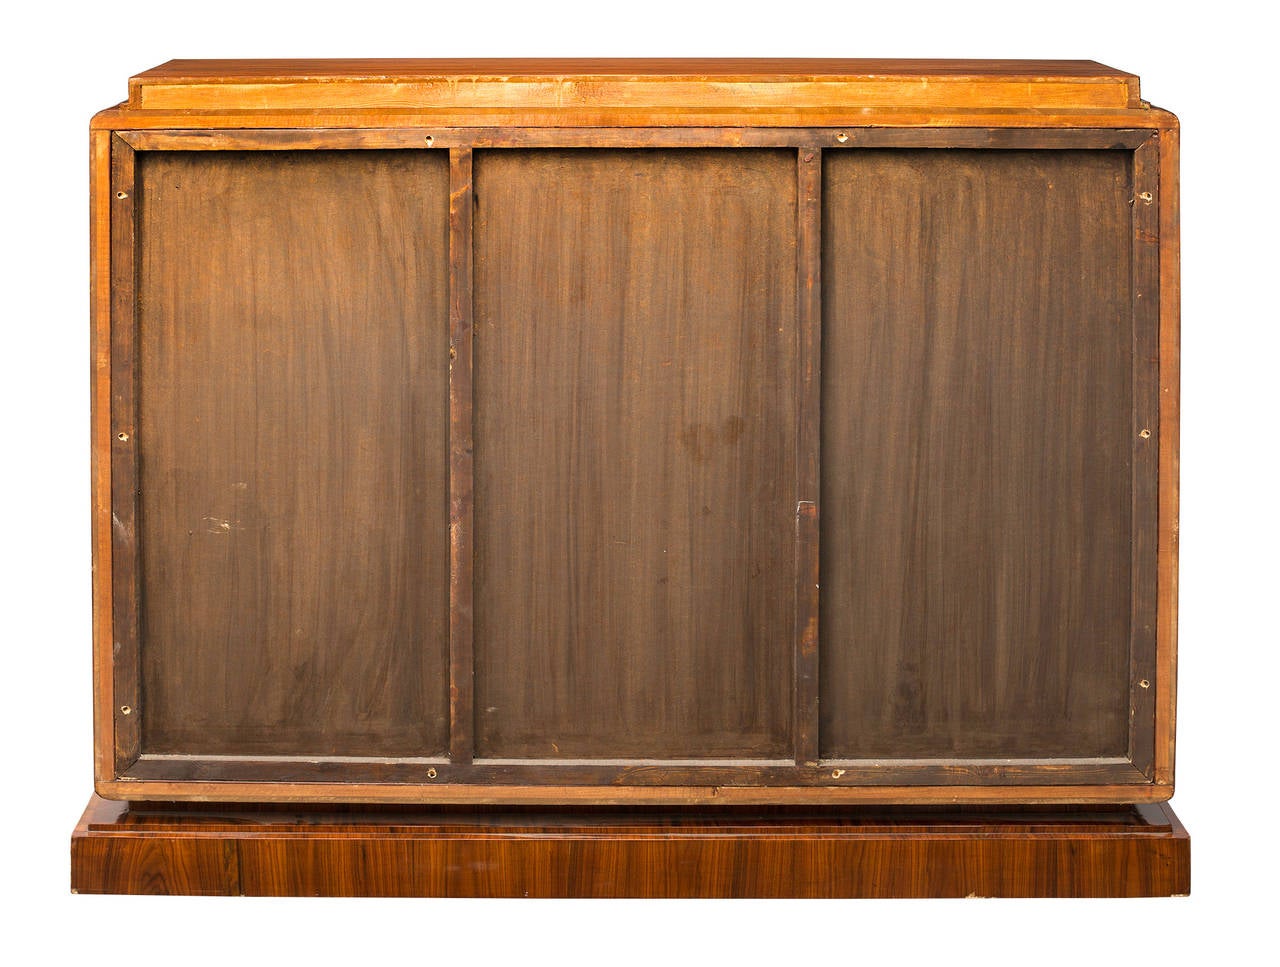 Art Deco Bookcase in Manner of Ruhlmann at 1stdibs